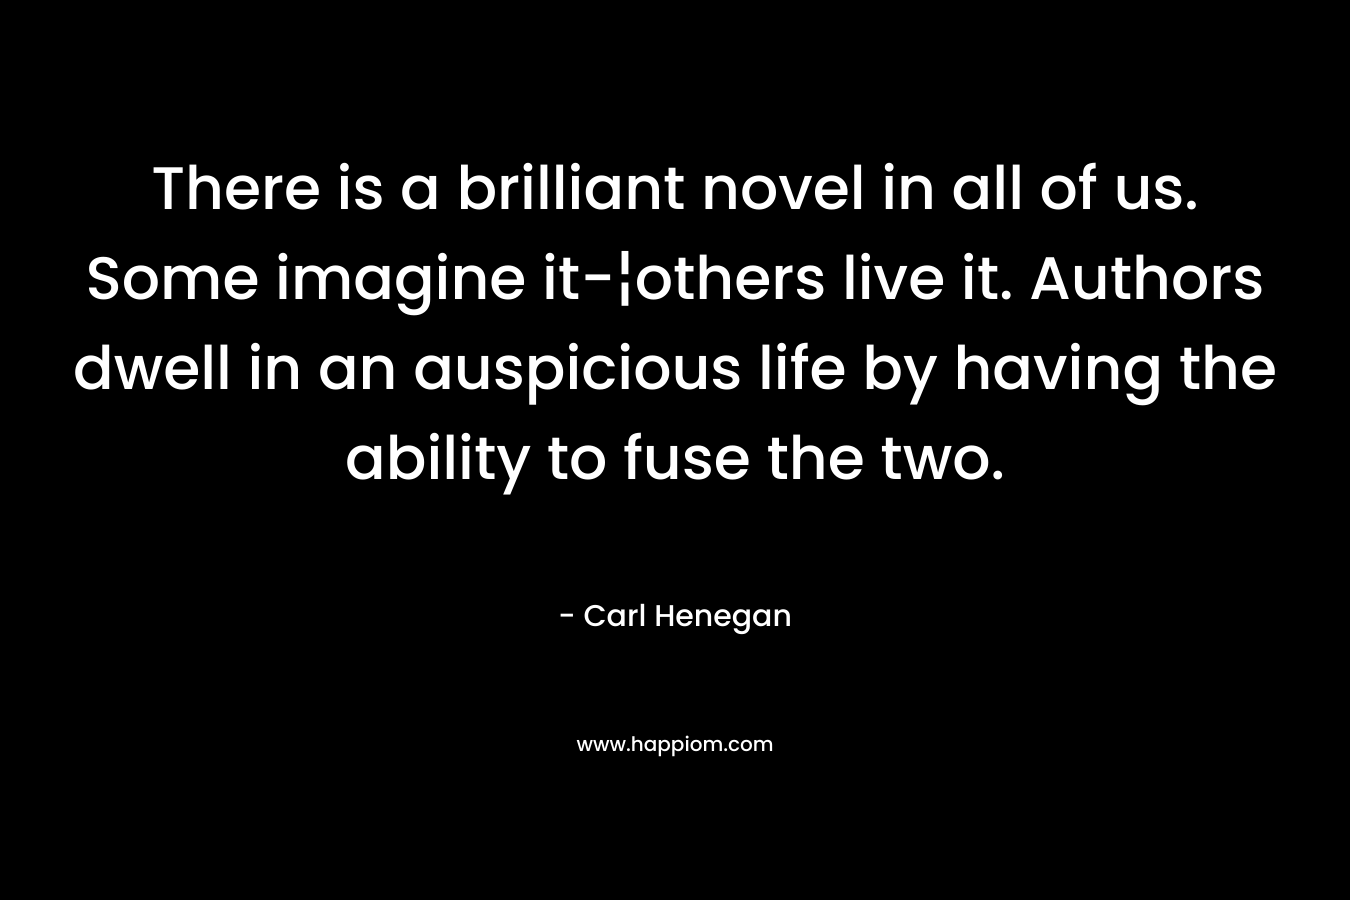 There is a brilliant novel in all of us. Some imagine it-¦others live it. Authors dwell in an auspicious life by having the ability to fuse the two. – Carl Henegan